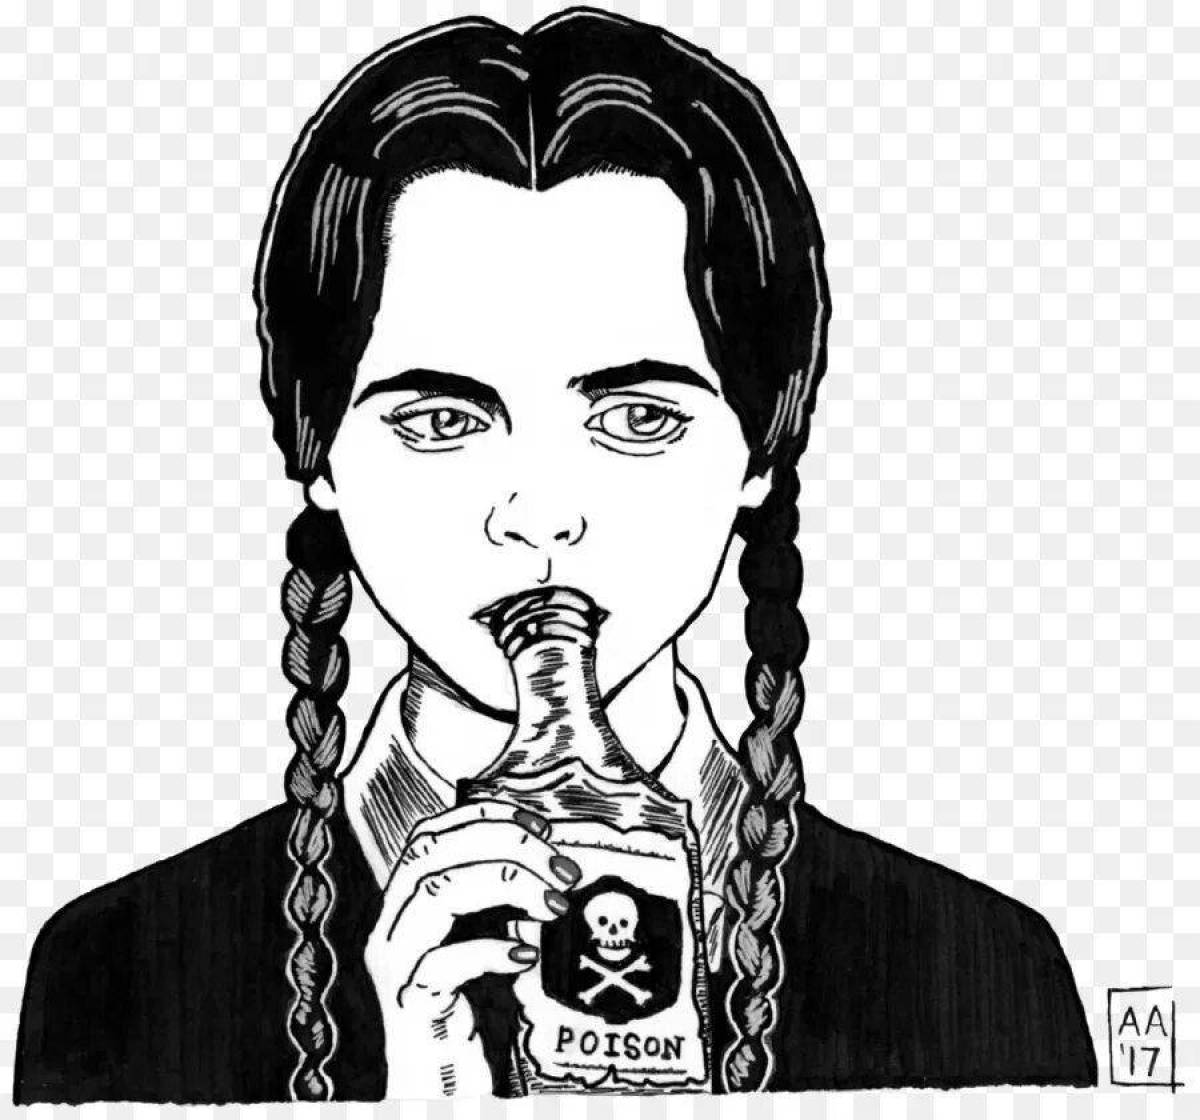 Wednesday Addams from series #2